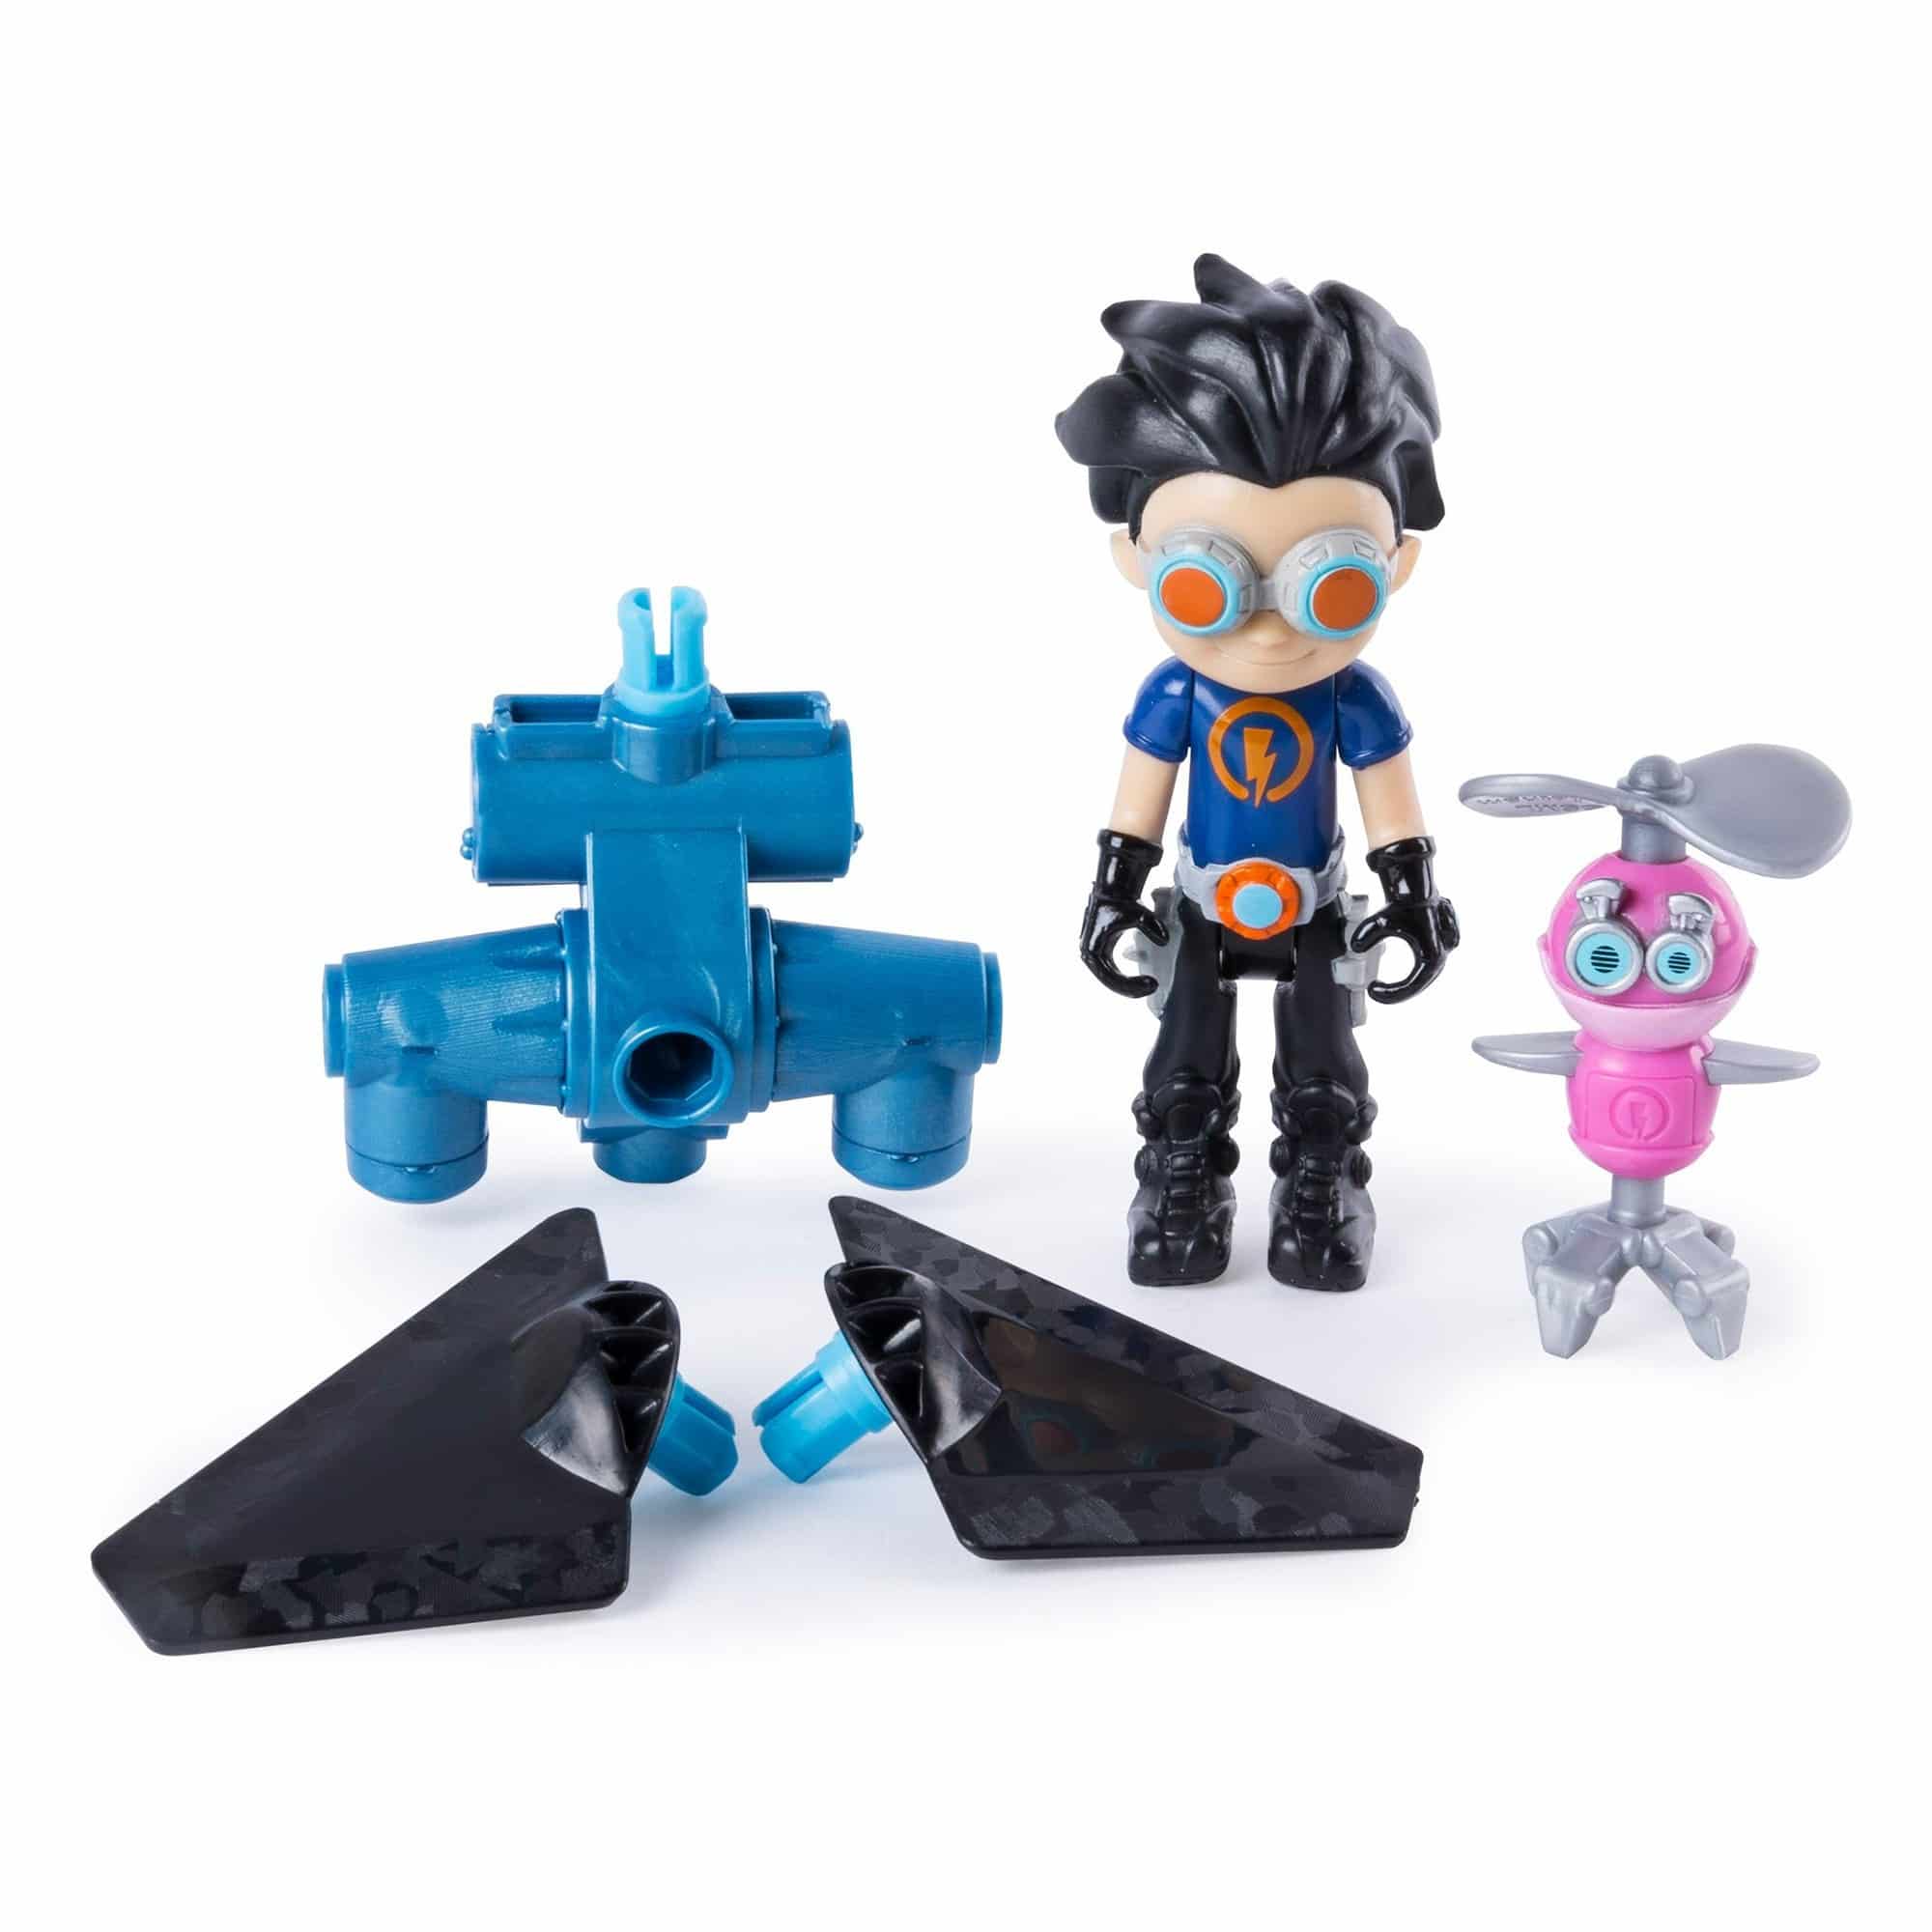 Rusty Rivets - Rusty & Whirly Build-a-Bit Pack